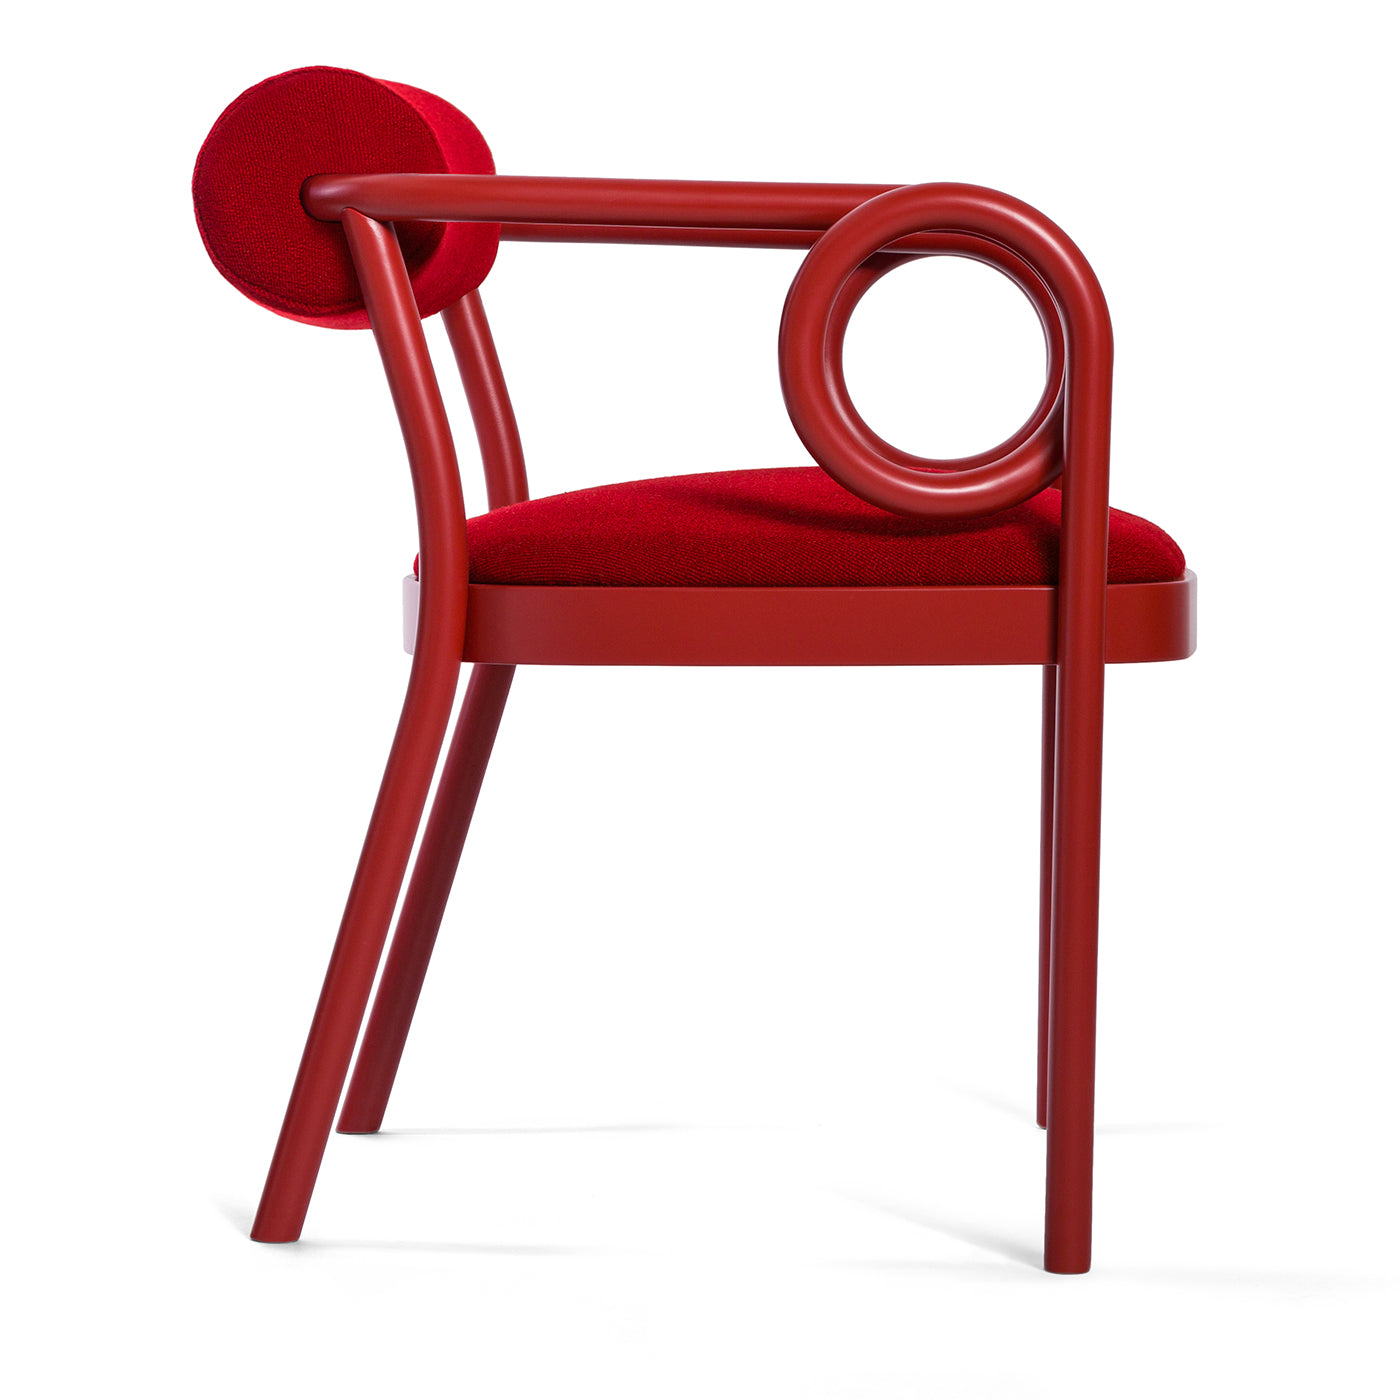 Loop Red Lounge Chair by India Mahdavi - Alternative view 3